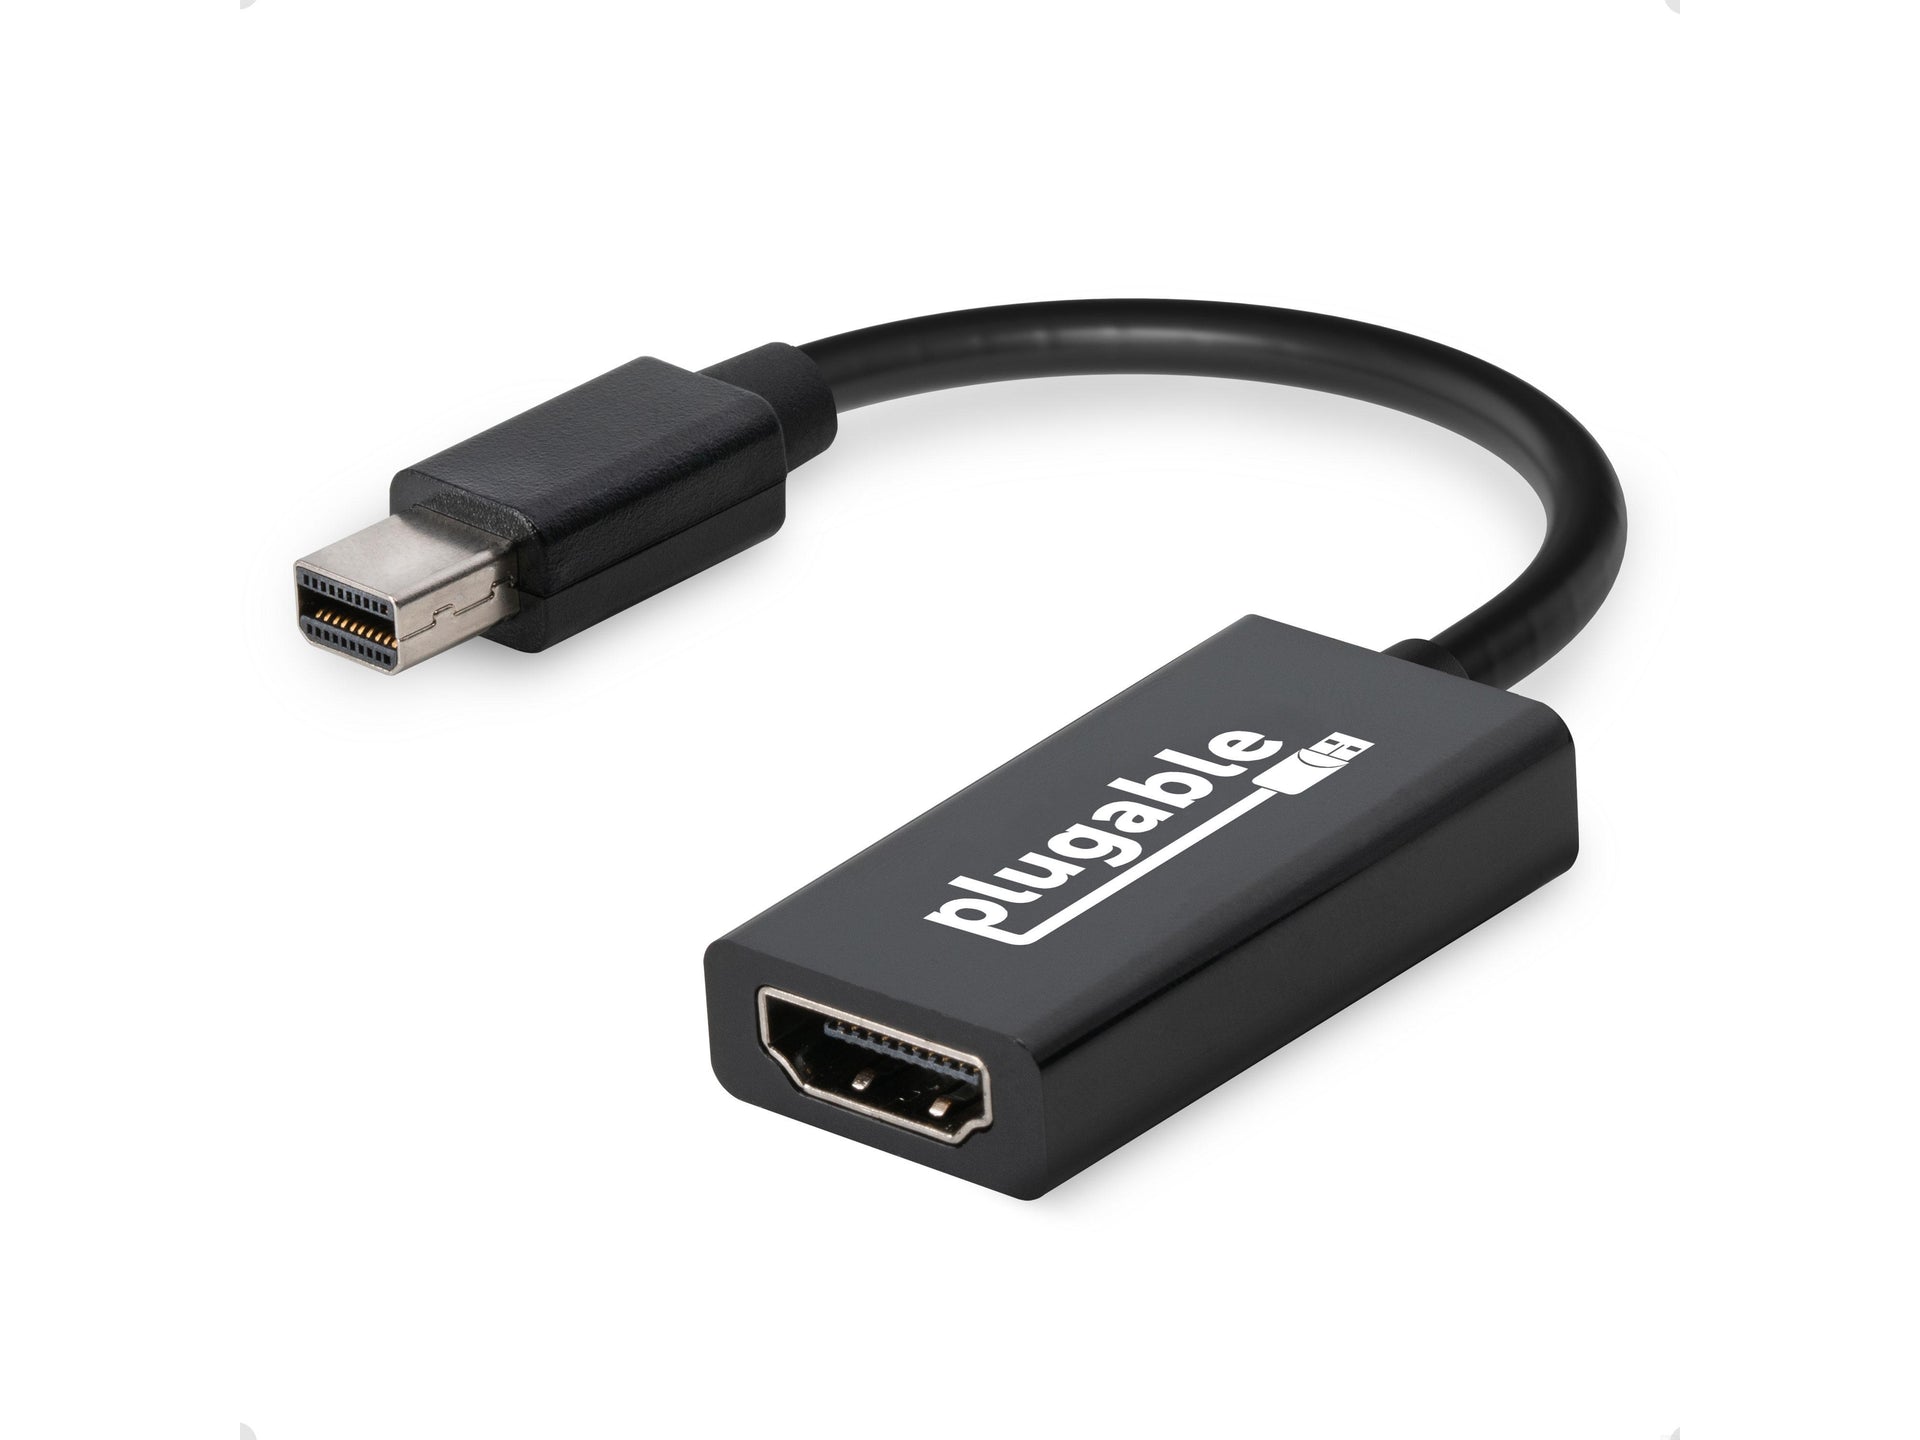 6ft (2m) USB C to HDMI Cable 4K 60Hz w/ HDR10 - Ultra HD USB Type-C to 4K  HDMI 2.0b Video Adapter Cable - USB-C to HDMI HDR Monitor/Display Converter